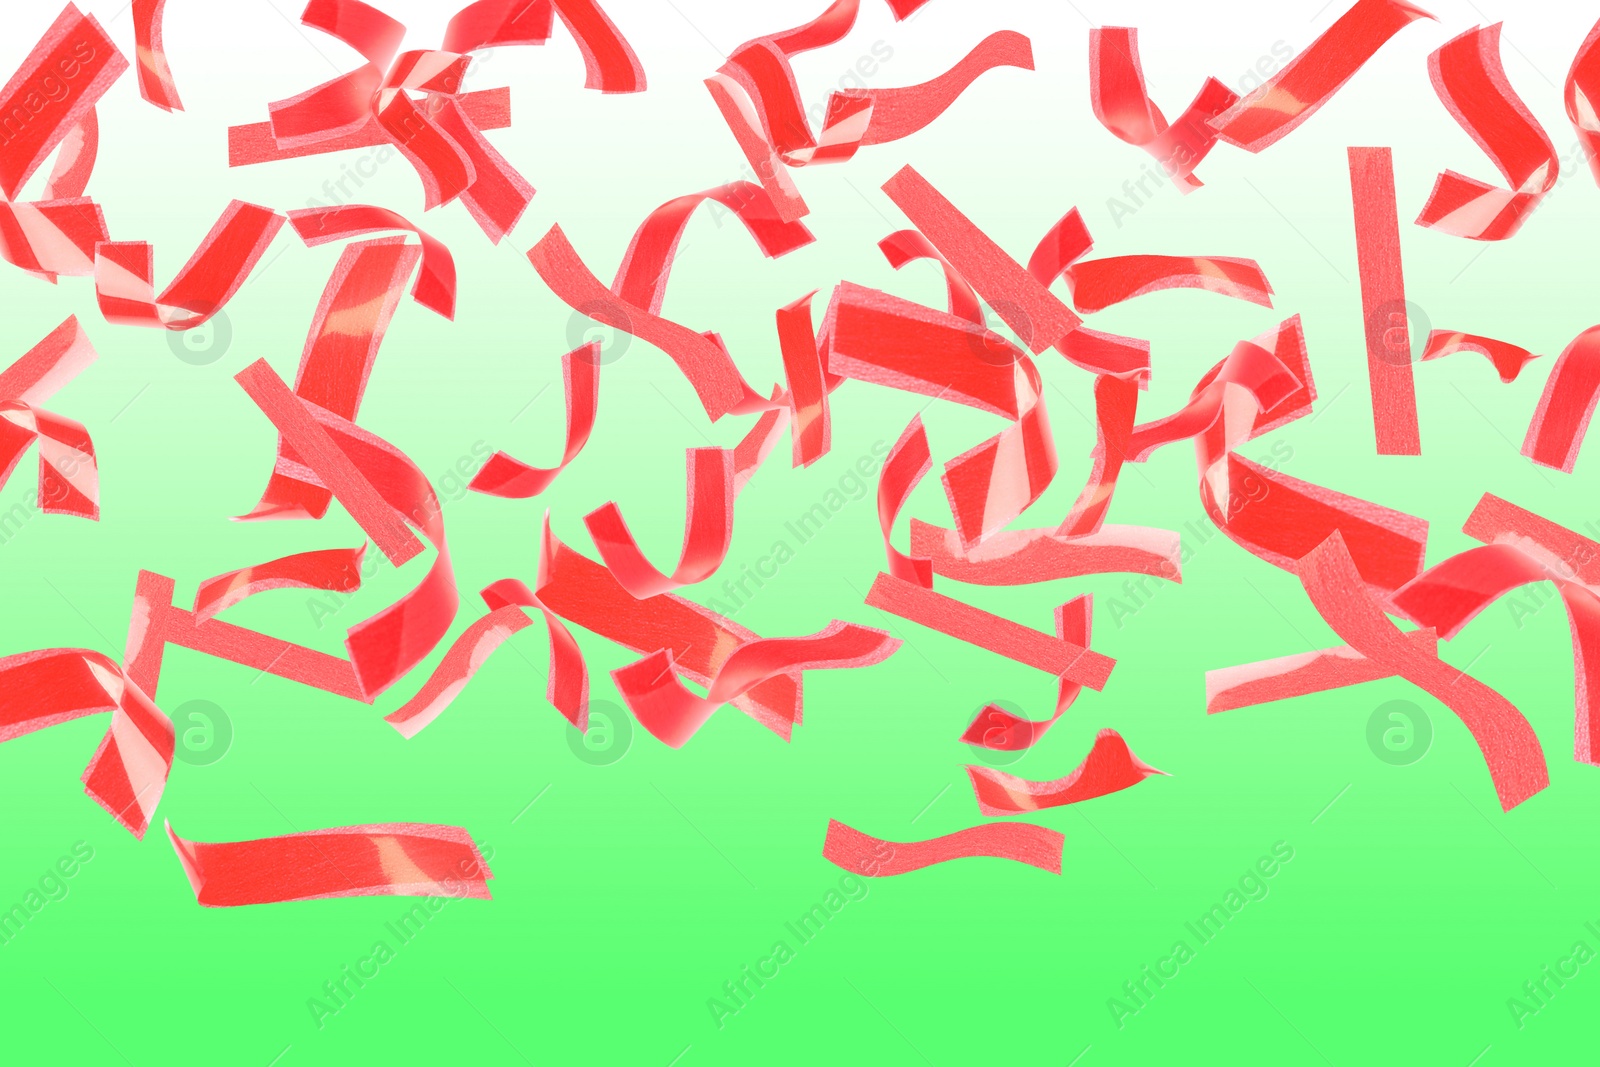 Image of Bright red confetti falling on gradient green background